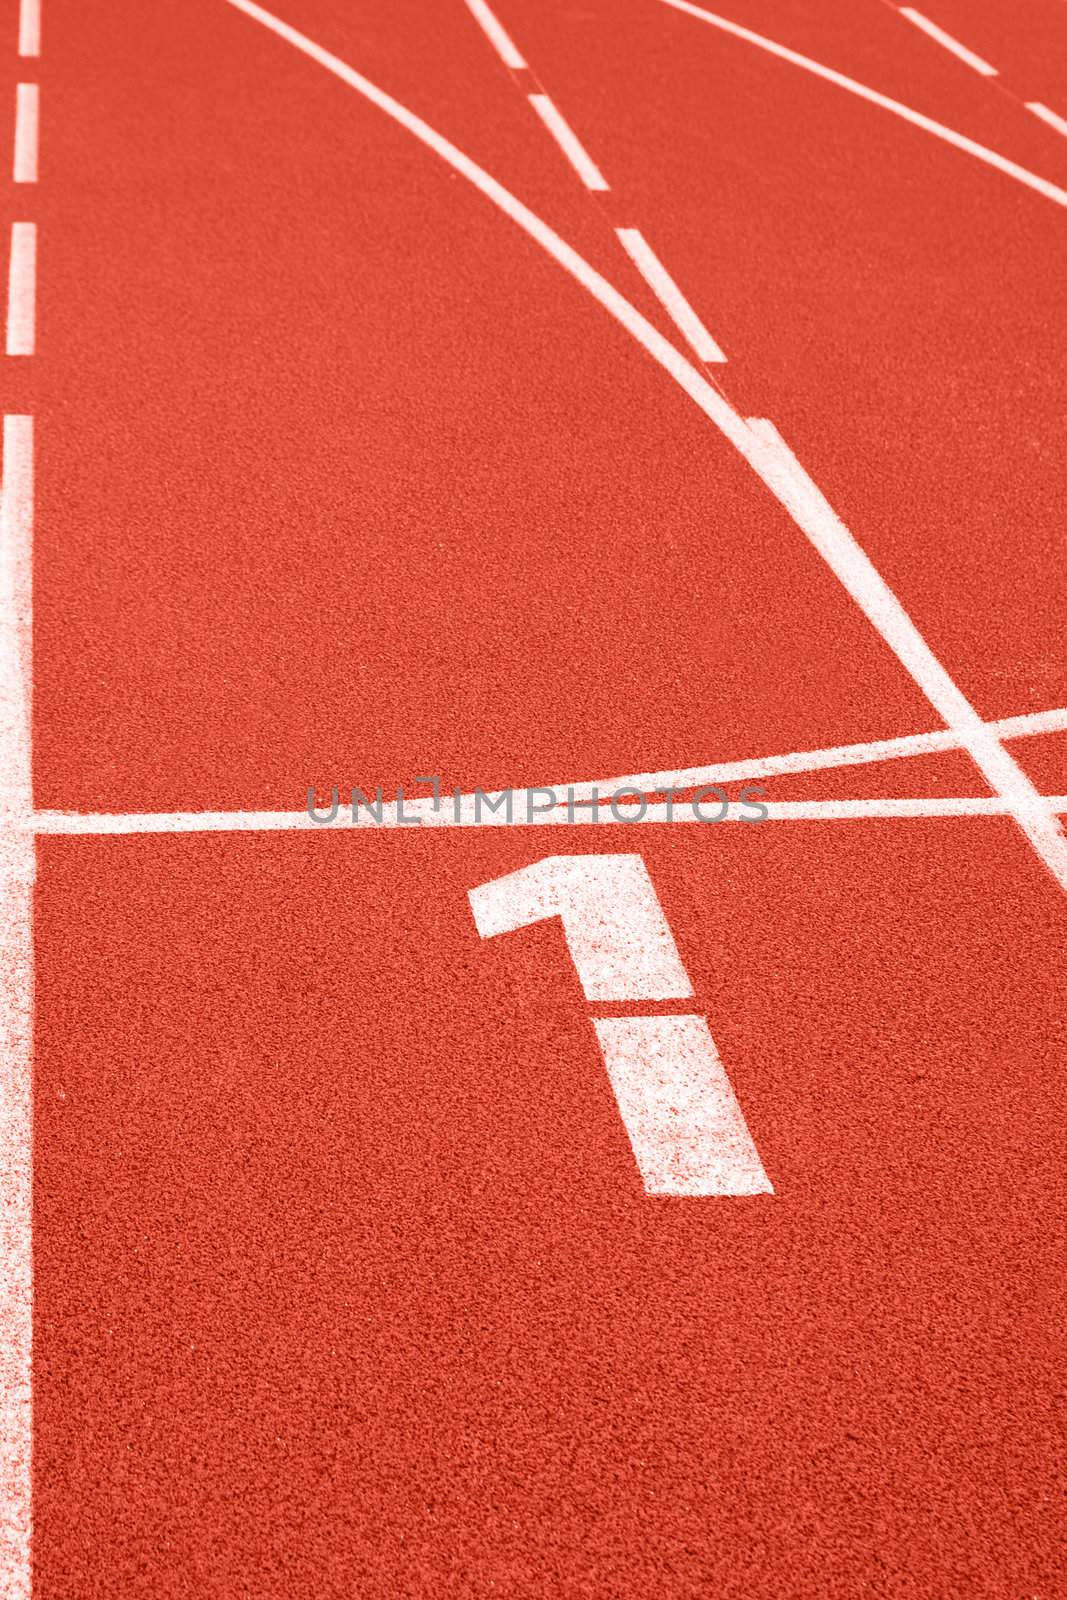 Close up of numbers on red running track.